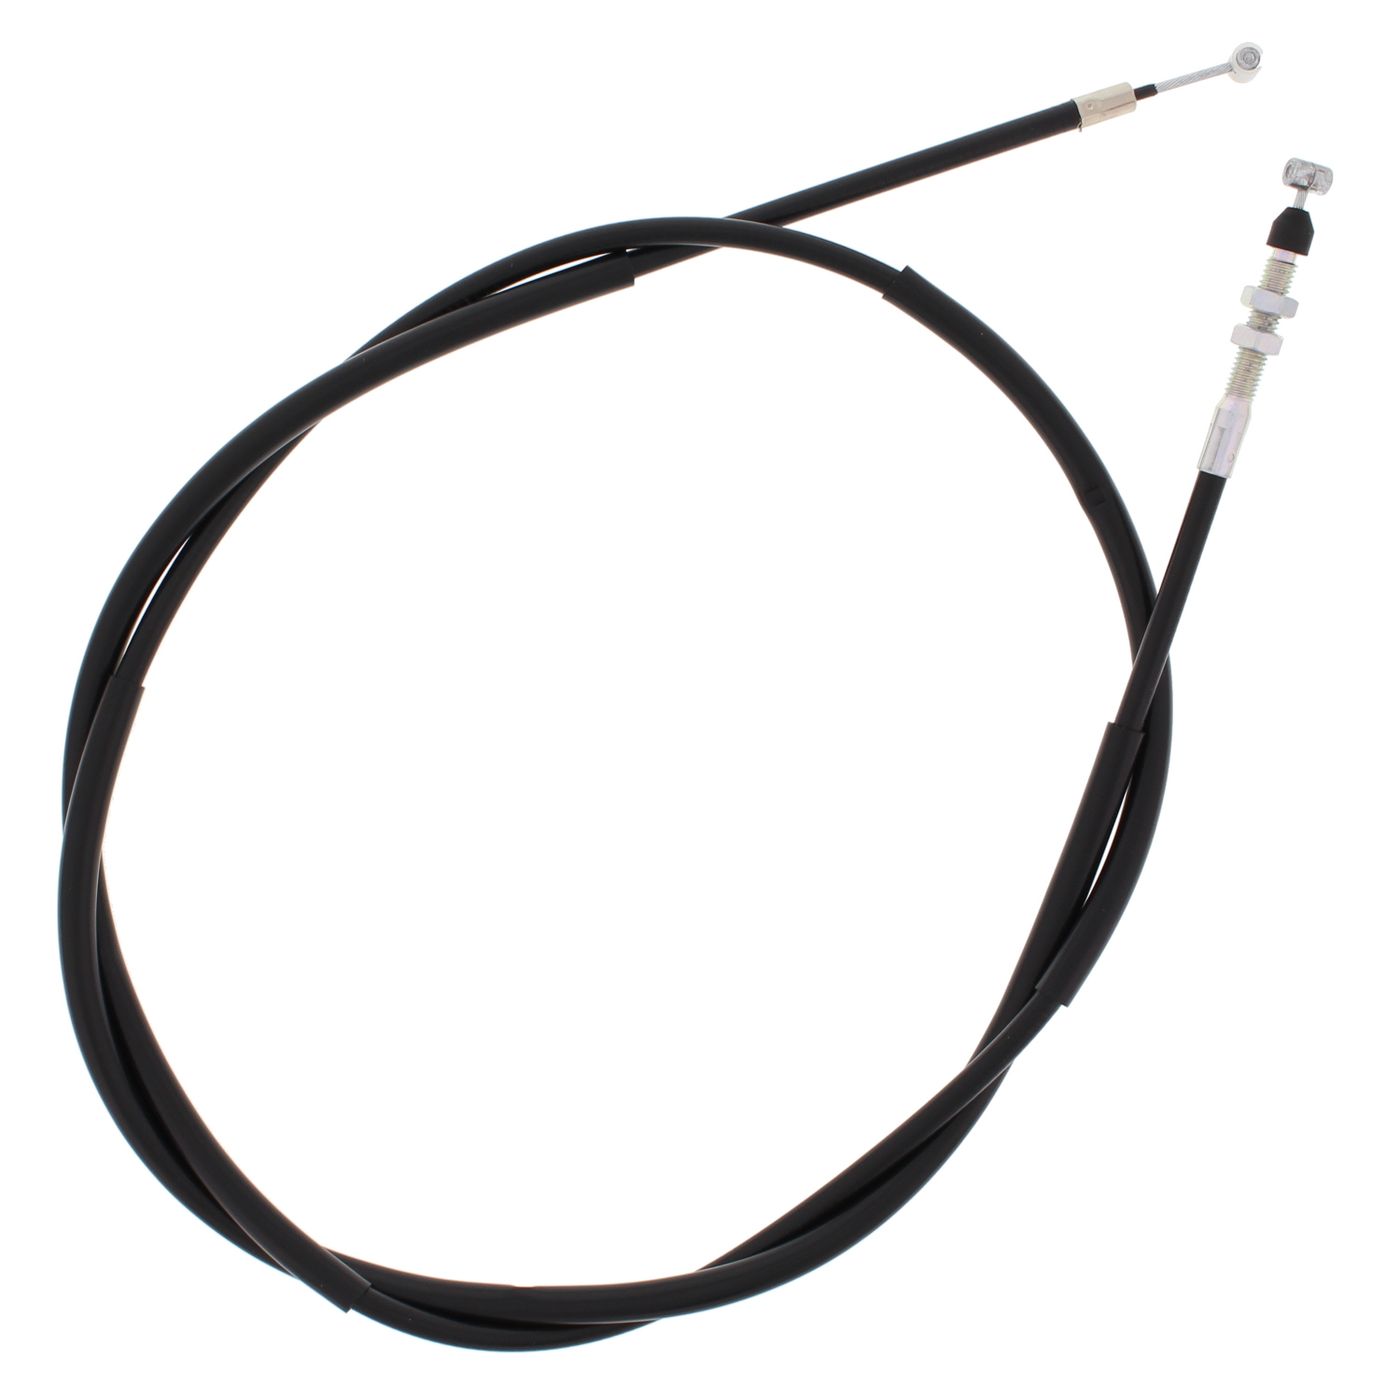 Wrp Brake Cables - WRP454046 image